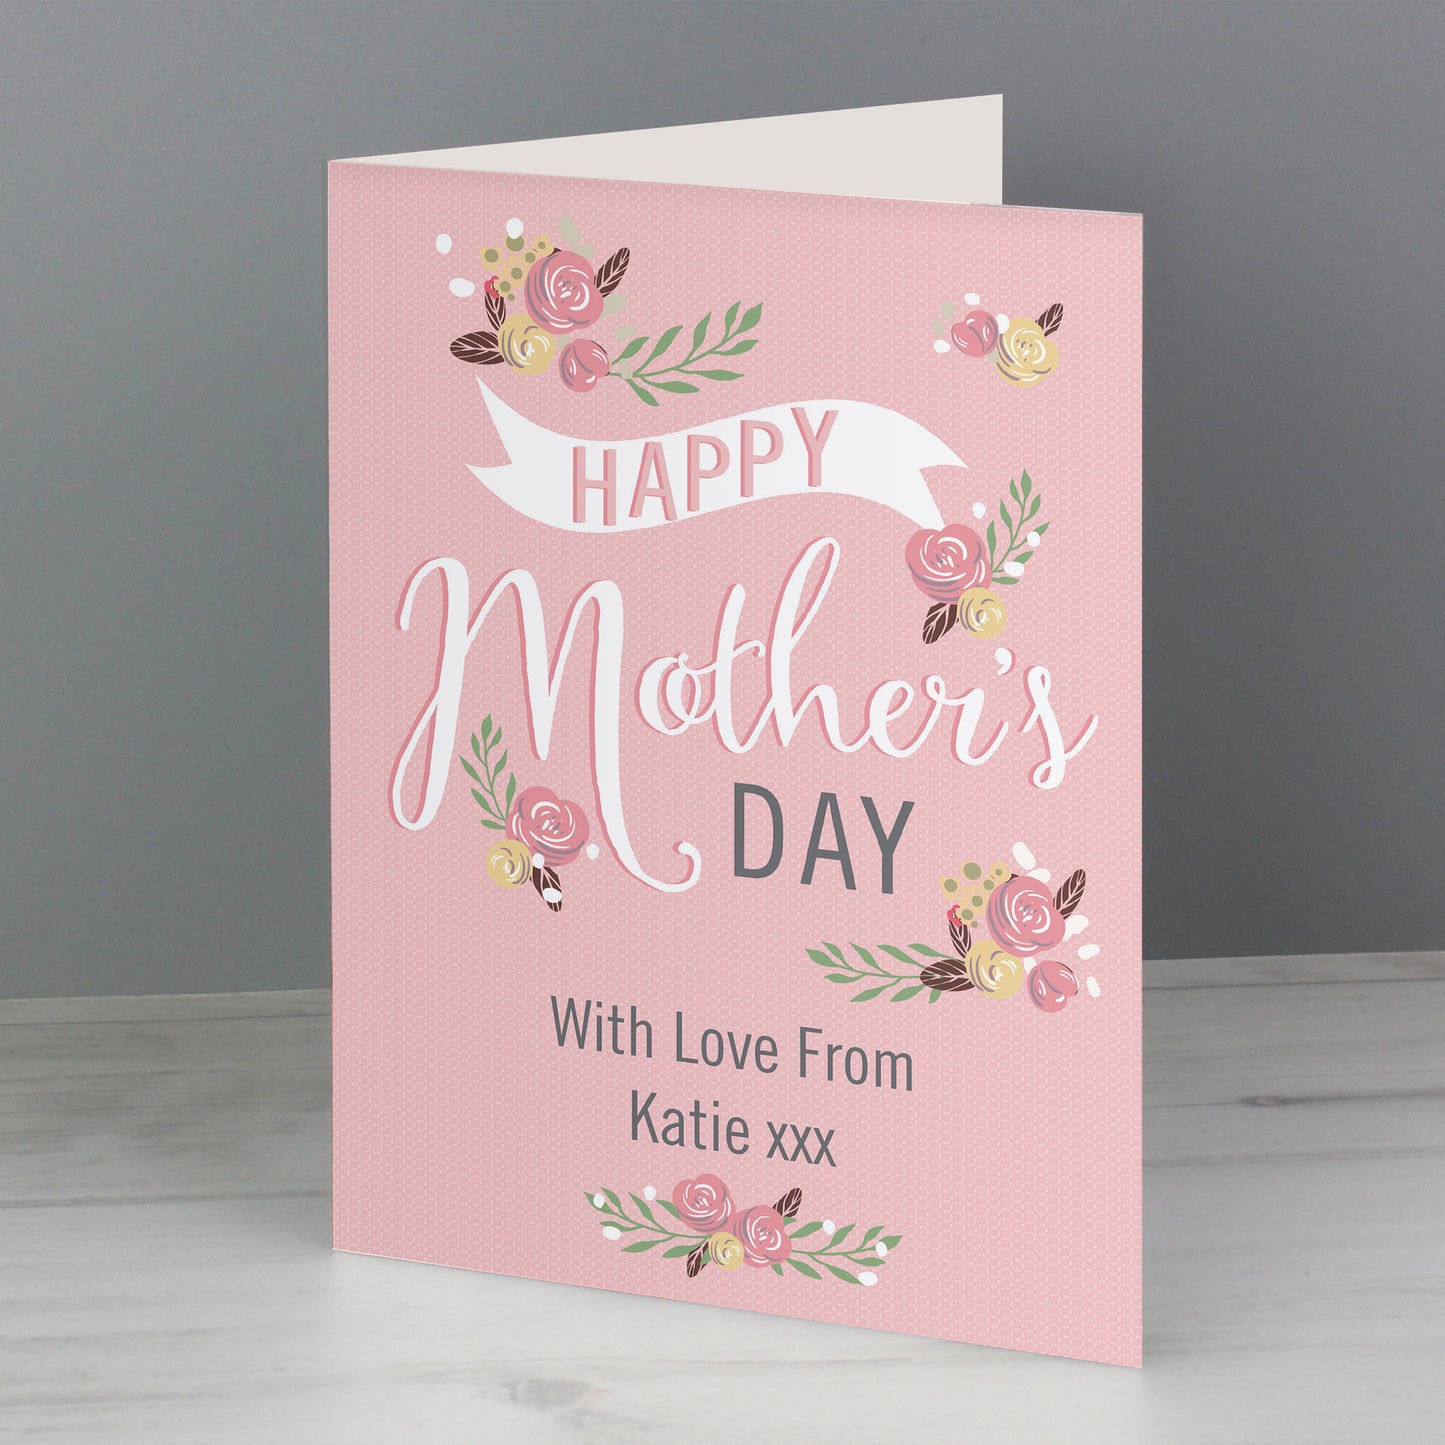 Personalised Floral Bouquet Mother's Day Card Add Any Name - Personalise It!